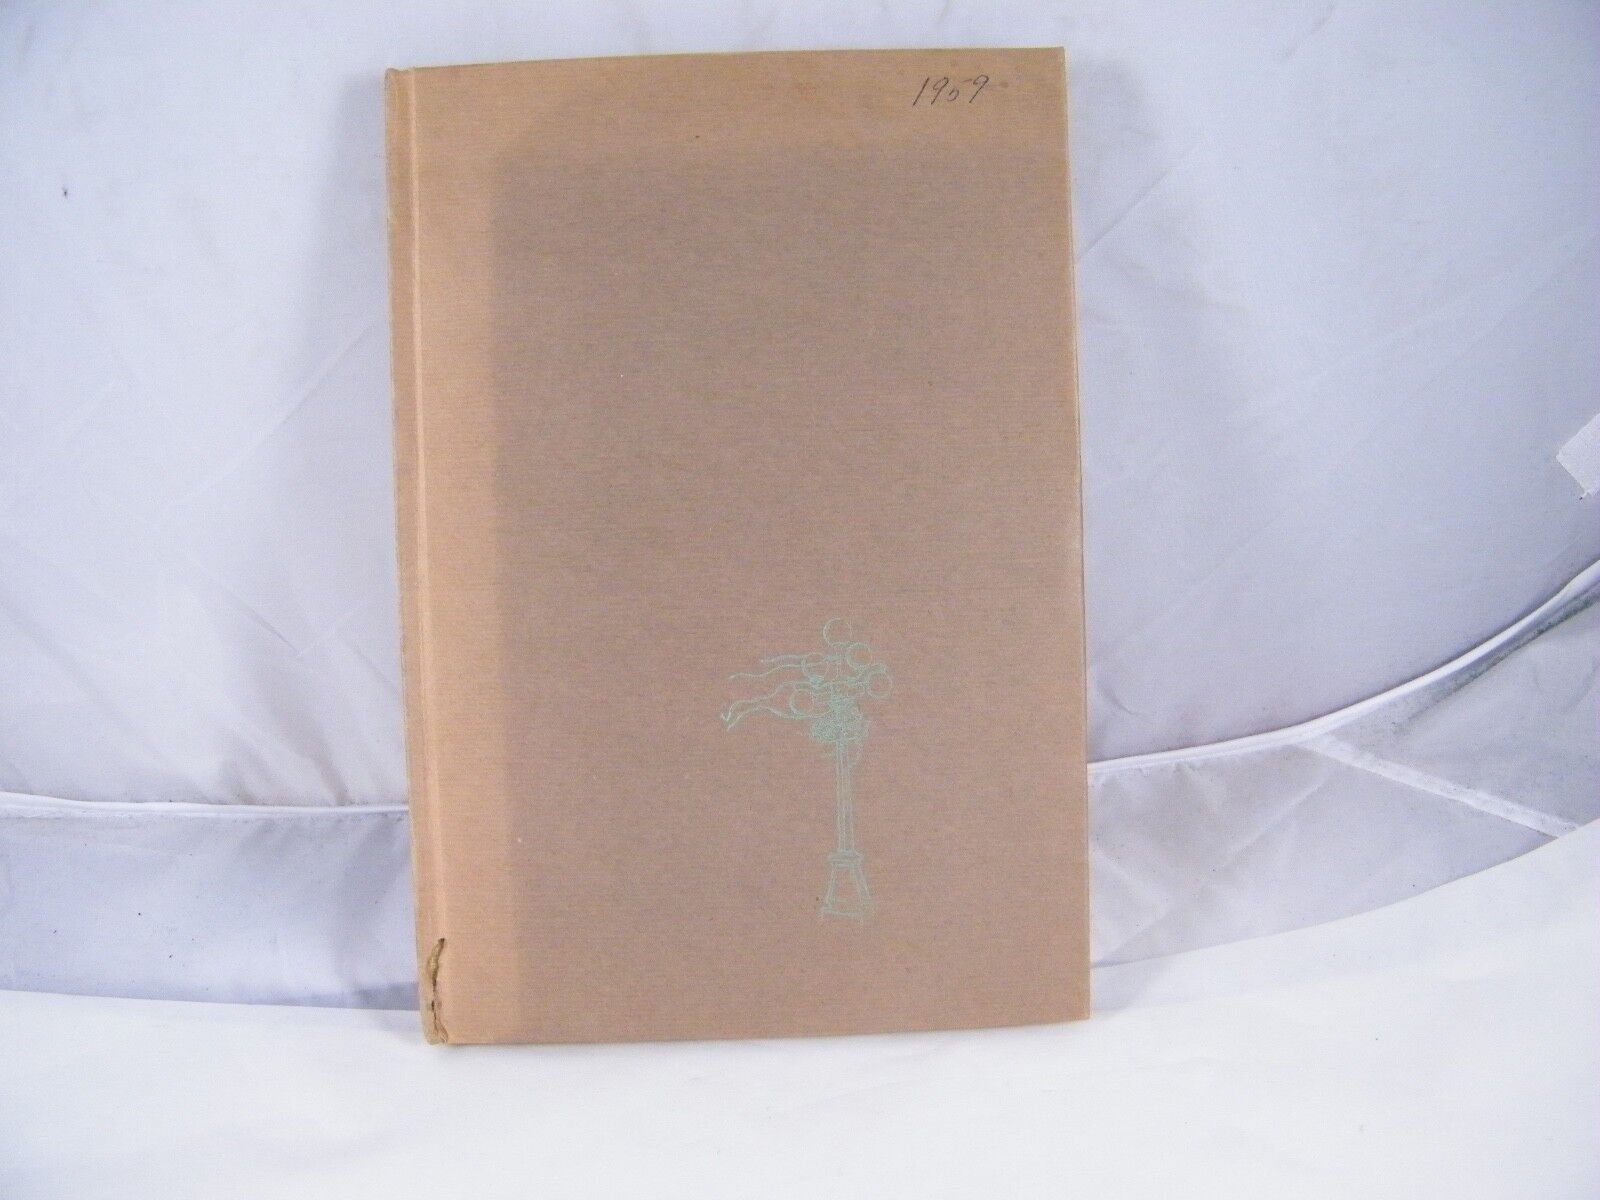 1959 EARLY SEATTLE PROFILES BY HENRY BRODERICK SIGNED HB